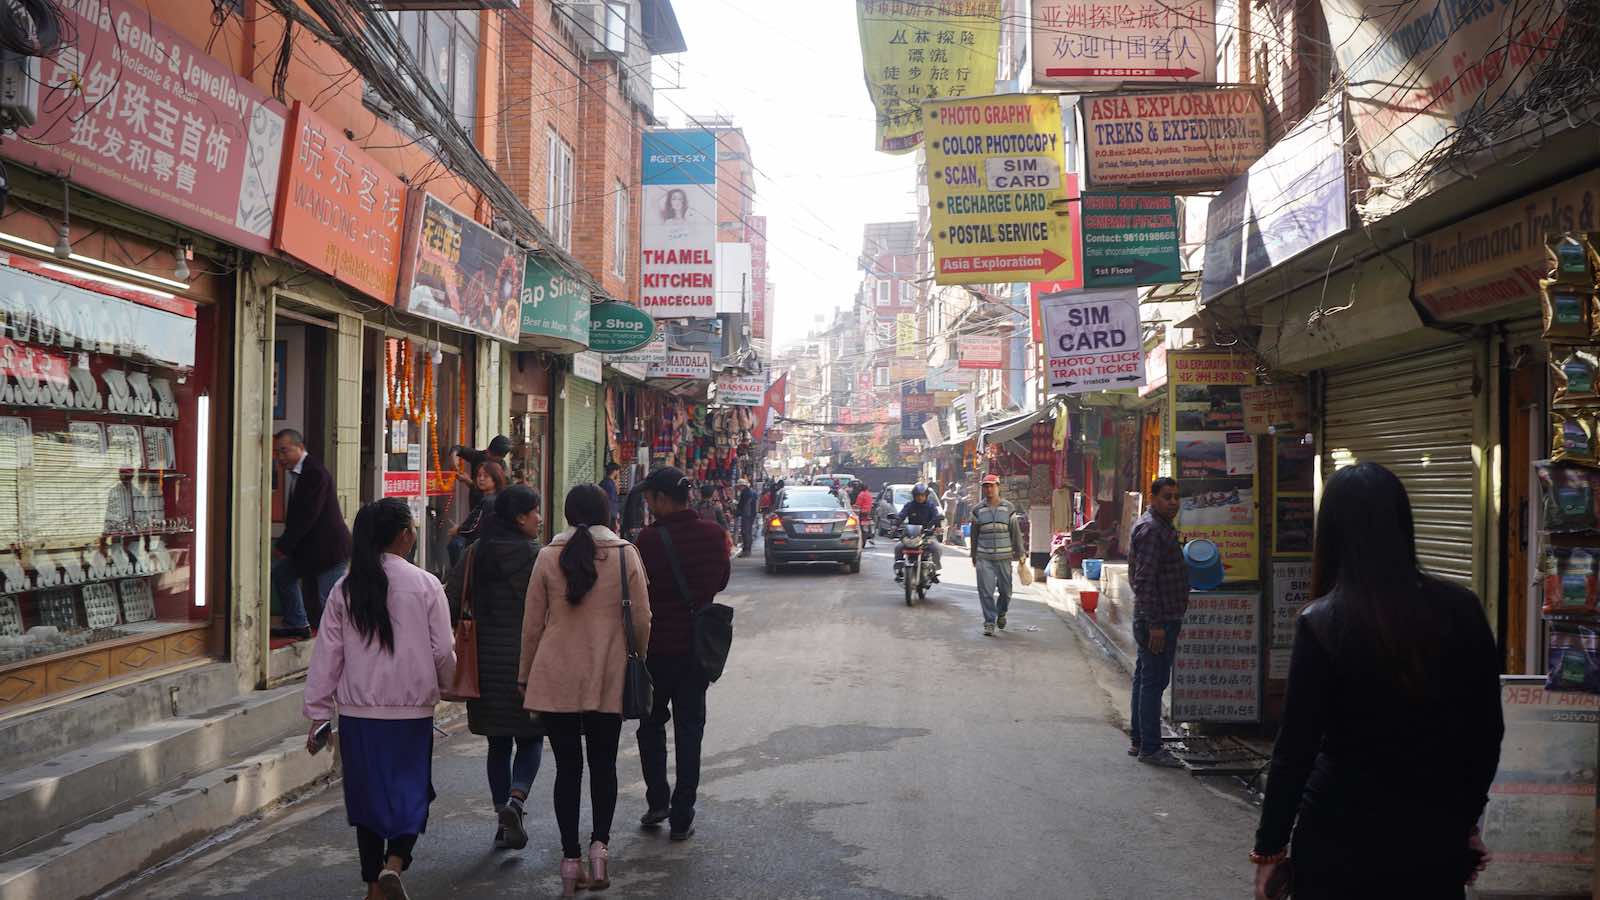 I stayed in Thamel which is the part of Kathmandu where all the lodging/hotels are and is considered the 'touristy' part. It was cleaner and more organized than the other parts of Kathmandu I saw later.